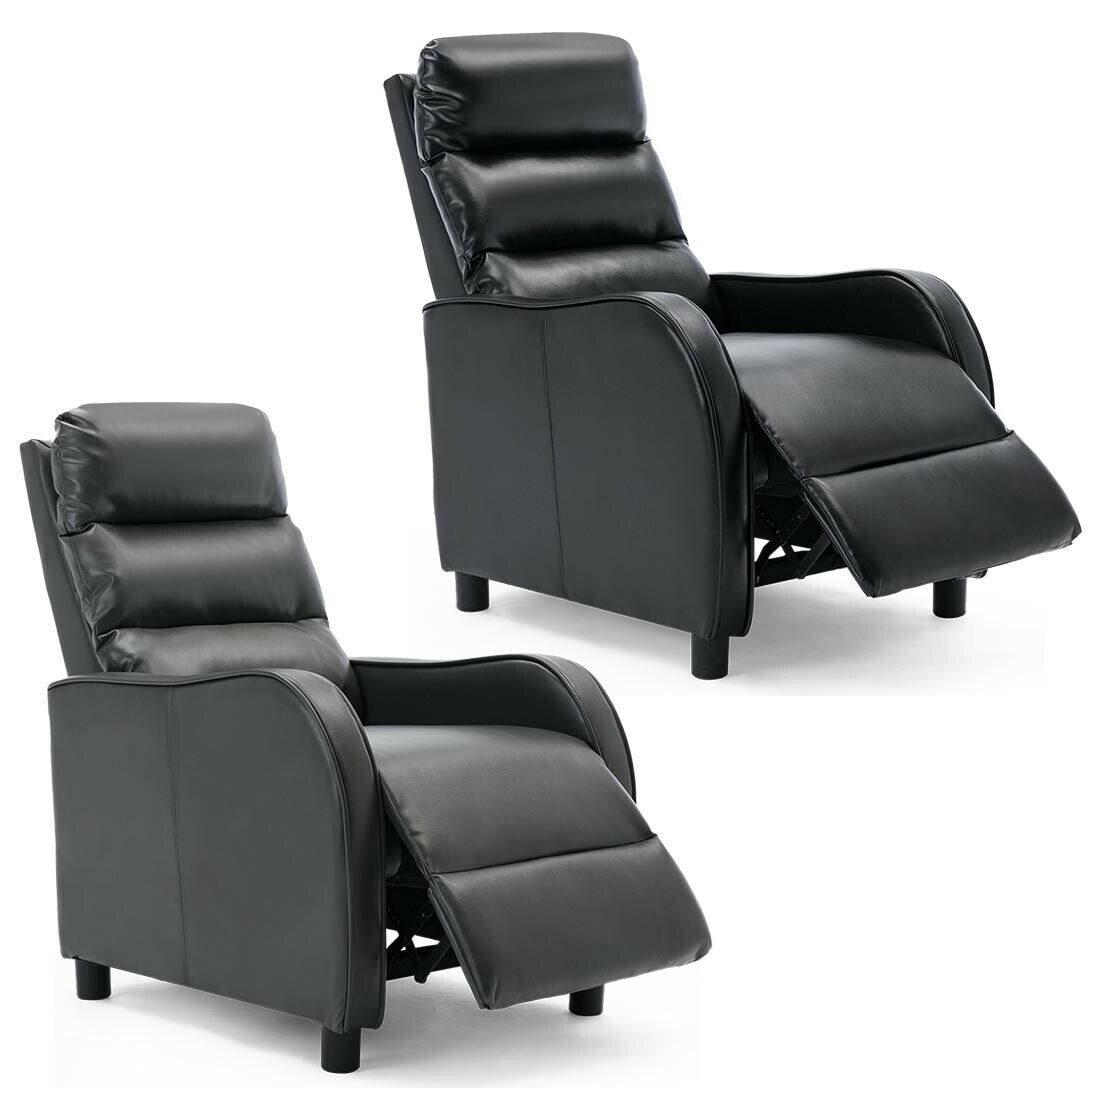 Selby Gaming Pushback Bonded Leather Recliner Chair Sofa Armcahir Inside Selby Armchairs (View 11 of 15)